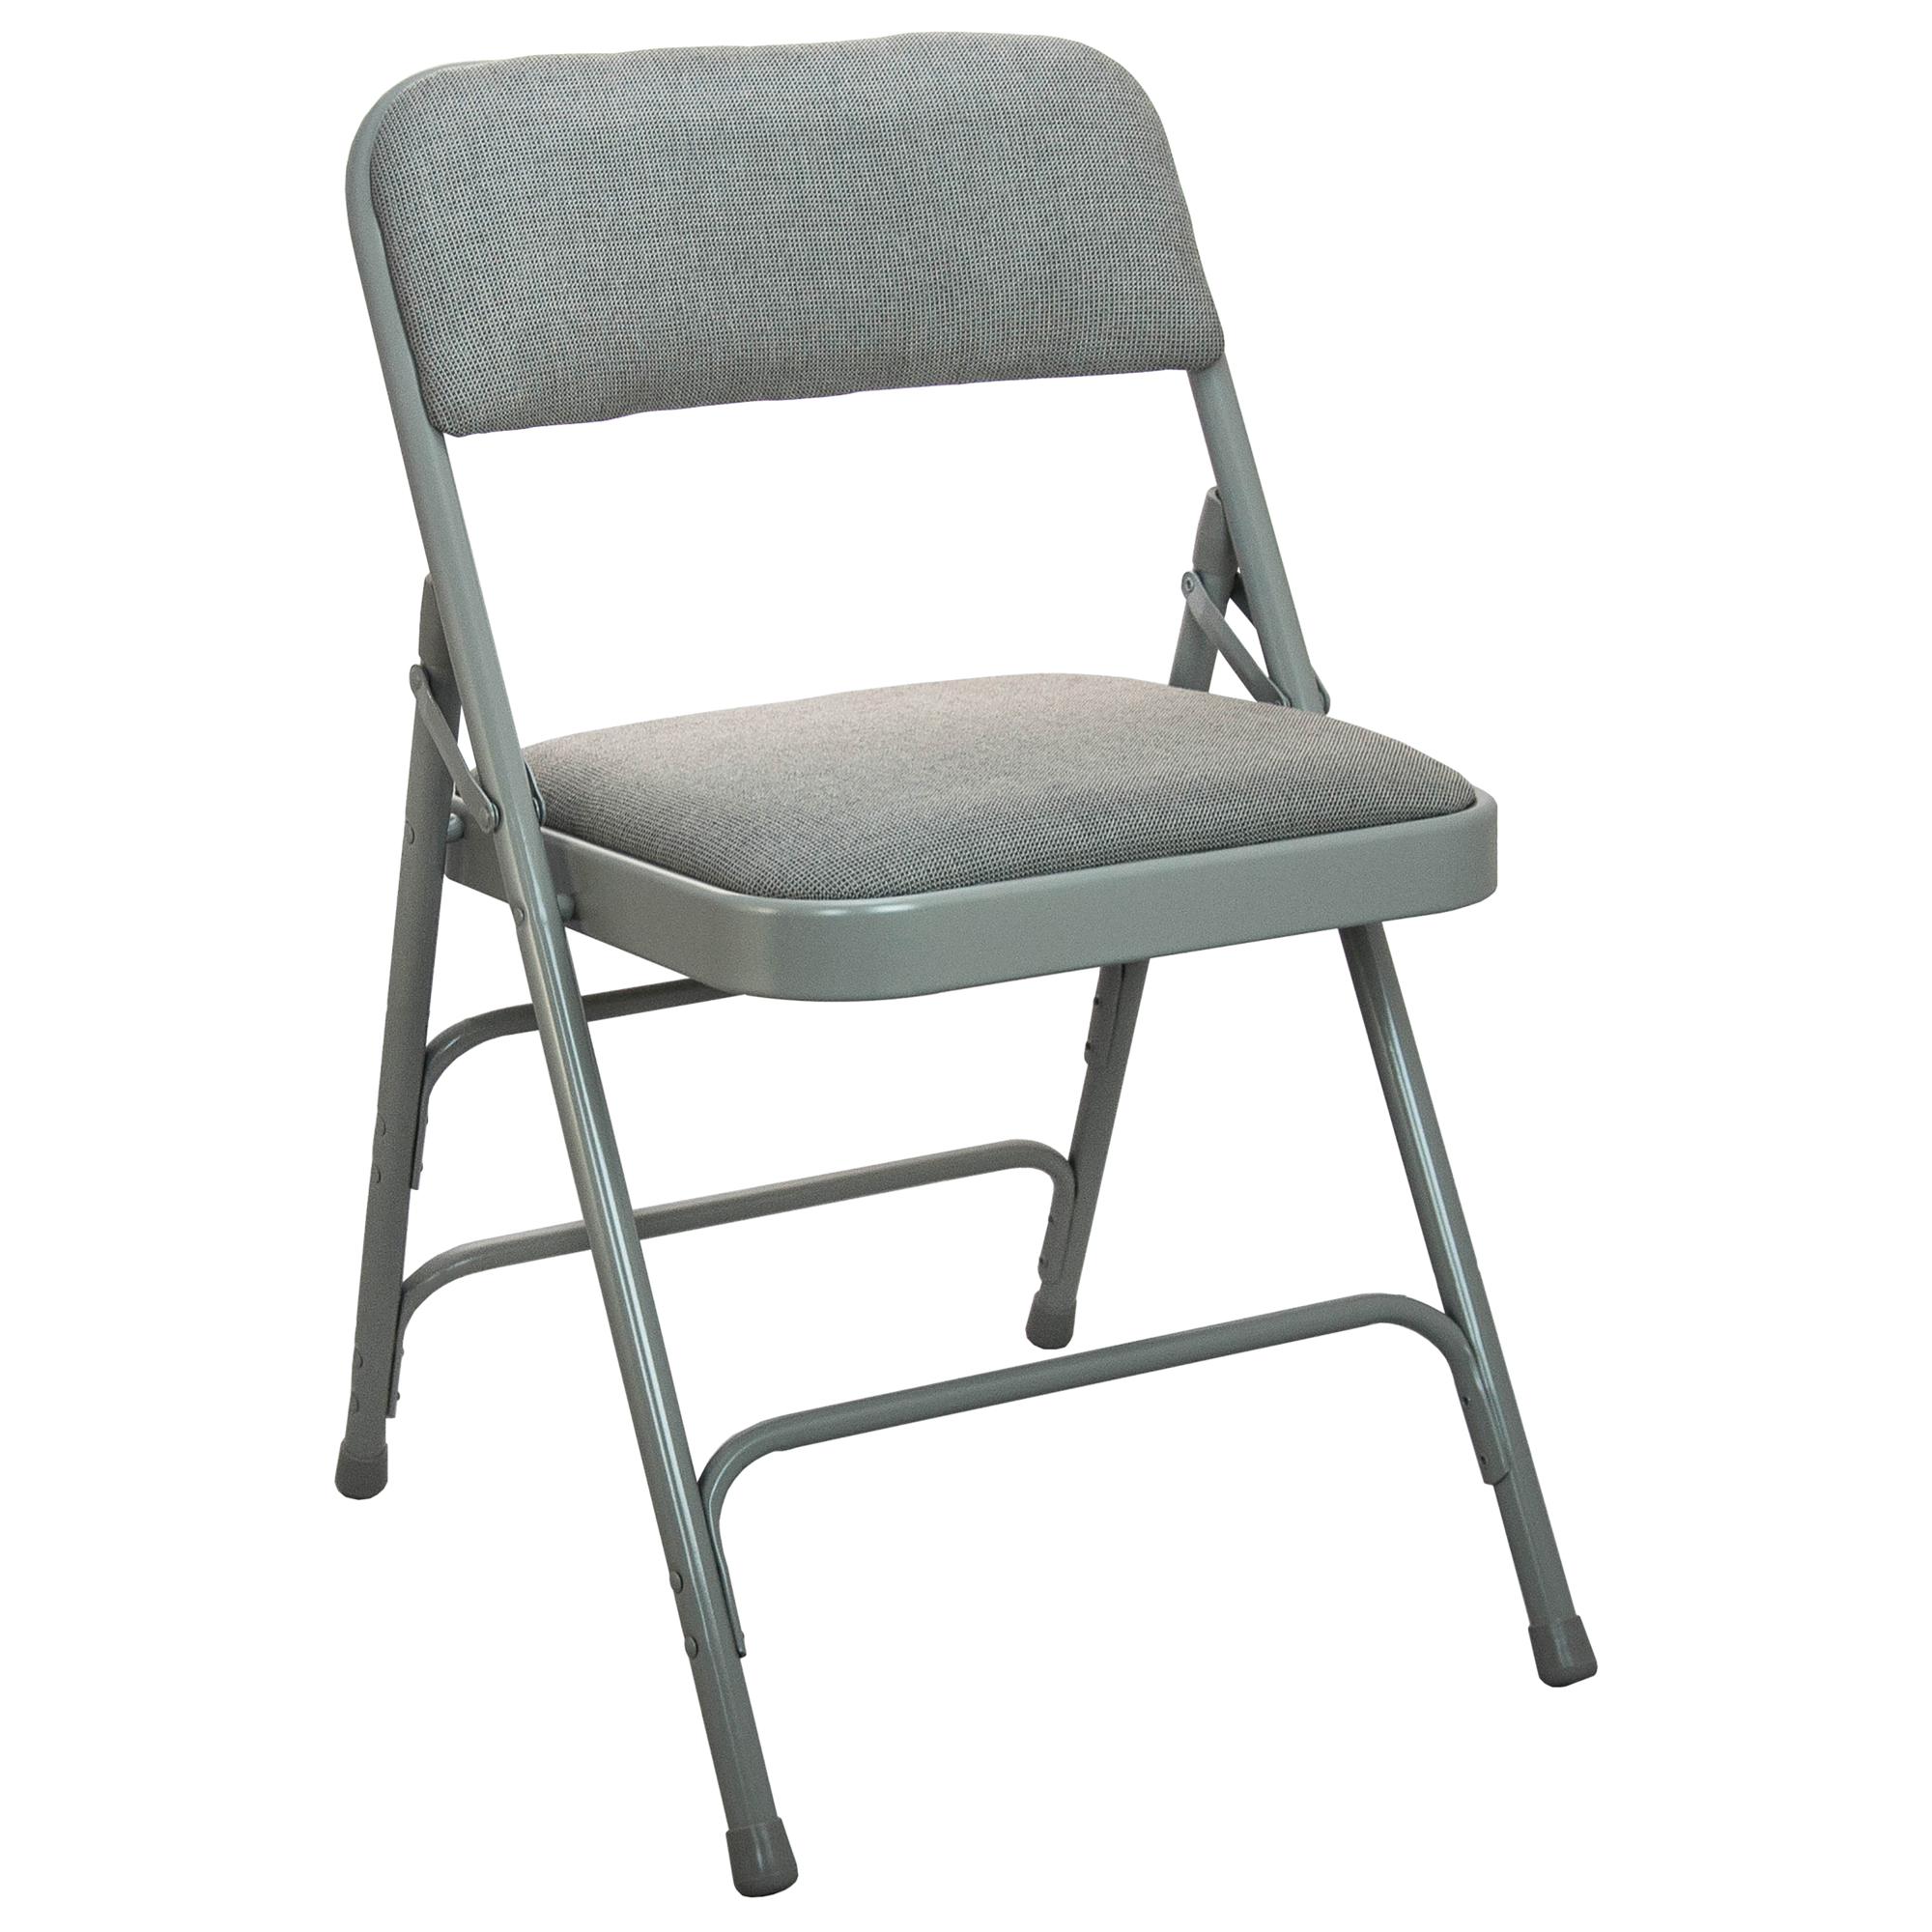 Flash Furniture, Grey Padded Metal Folding Chair - 1Inch Fabric Seat, Primary Color Gray, Included (qty.) 1, Model DPI903FGG